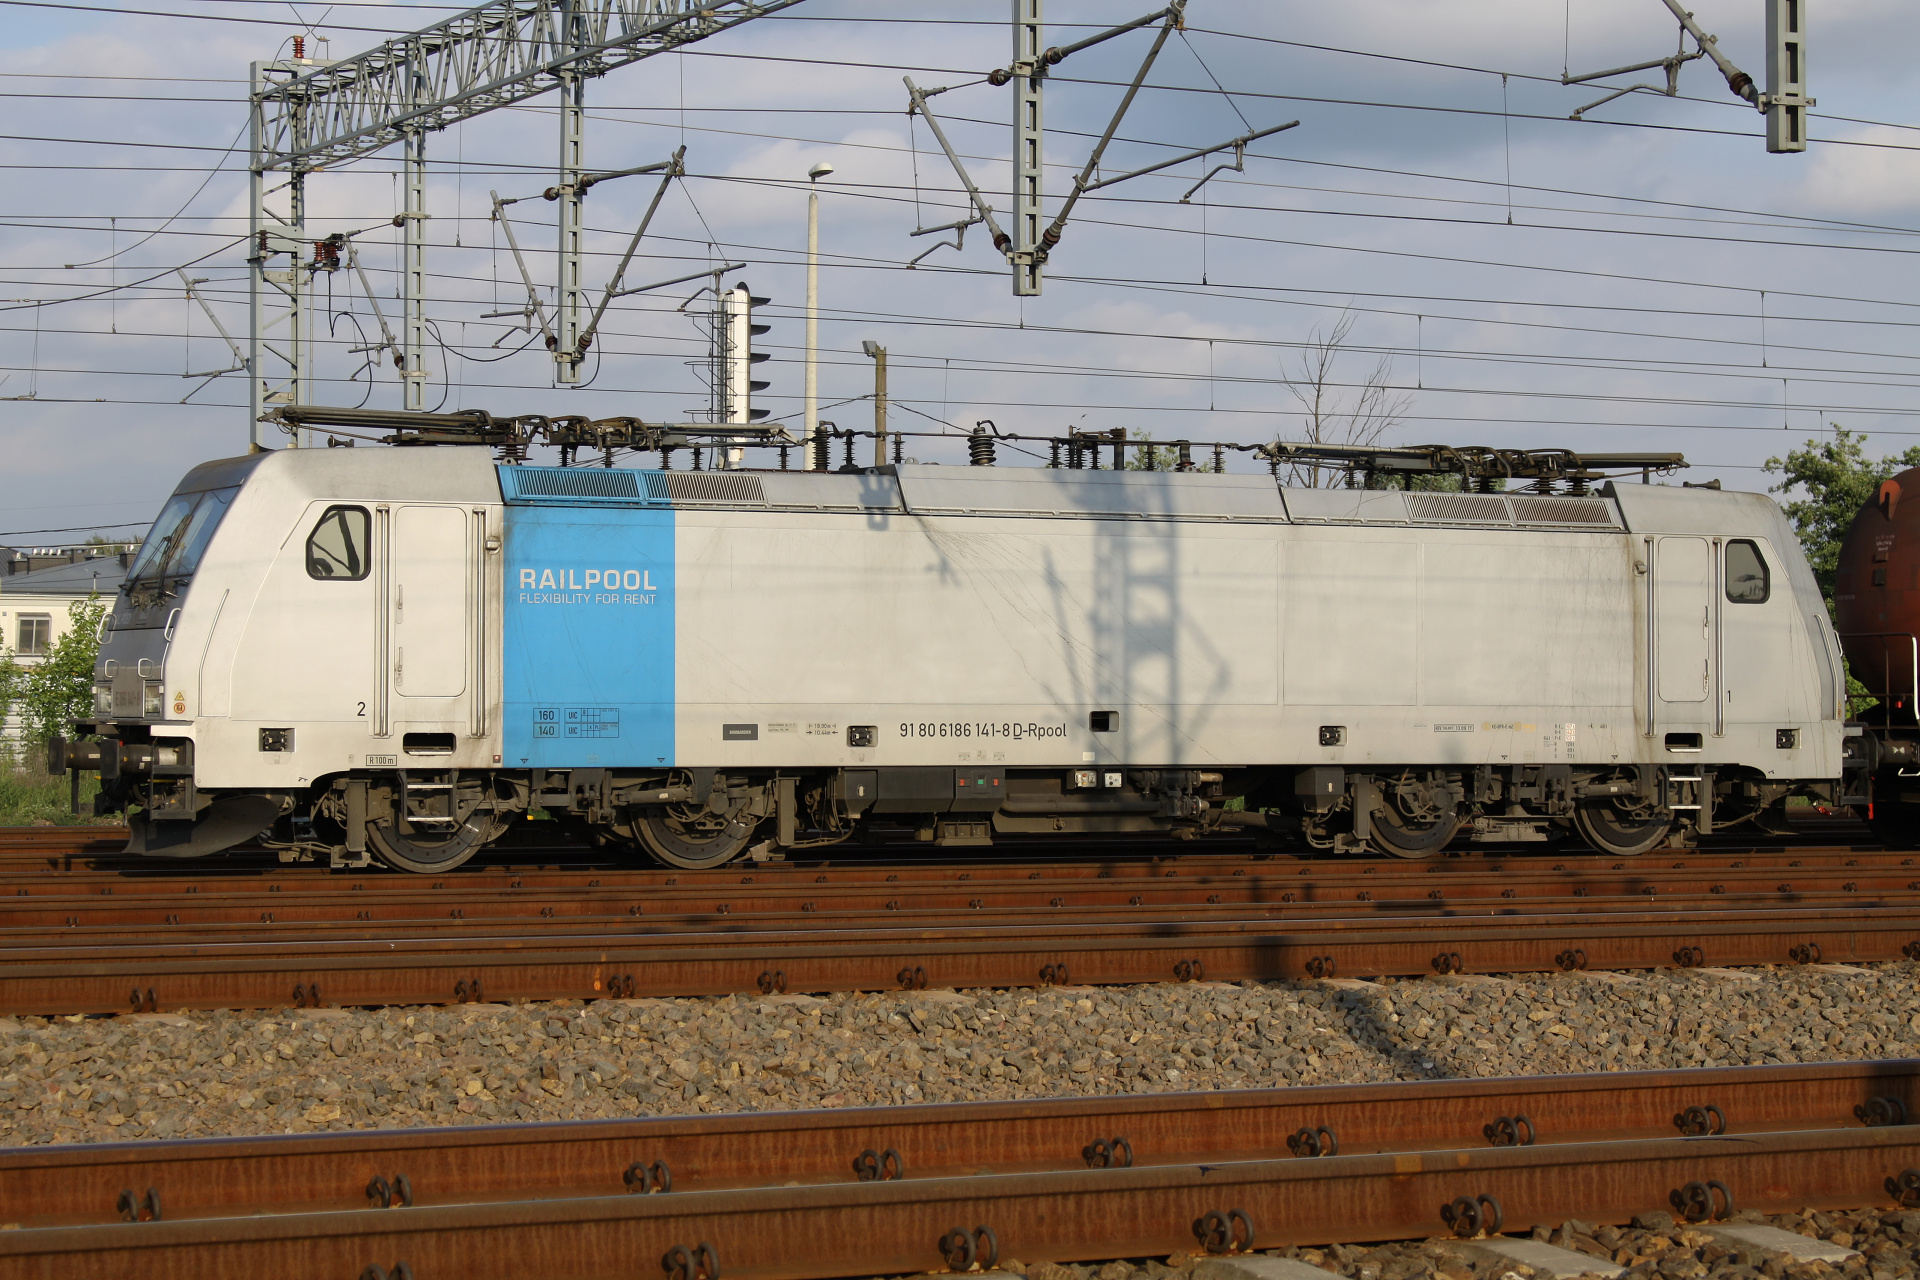 F140MS E186 141-8 (Vehicles » Trains and Locomotives » Bombardier TRAXX)